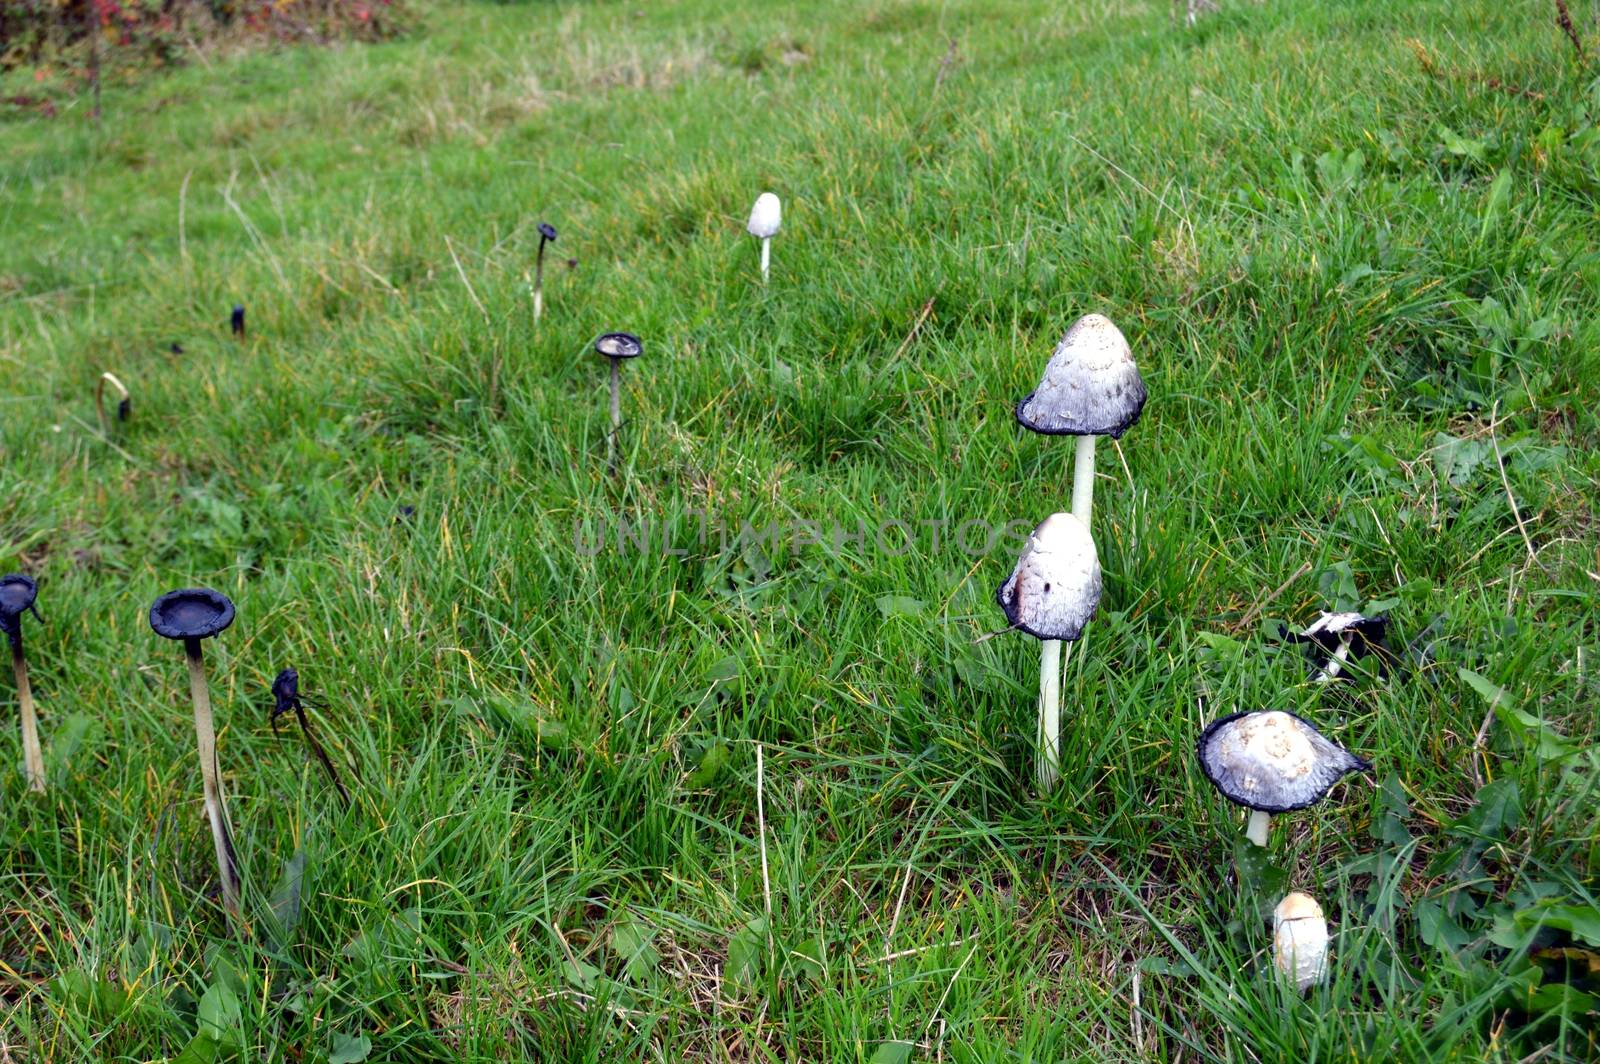 white mushrooms in the grass  by Philou1000